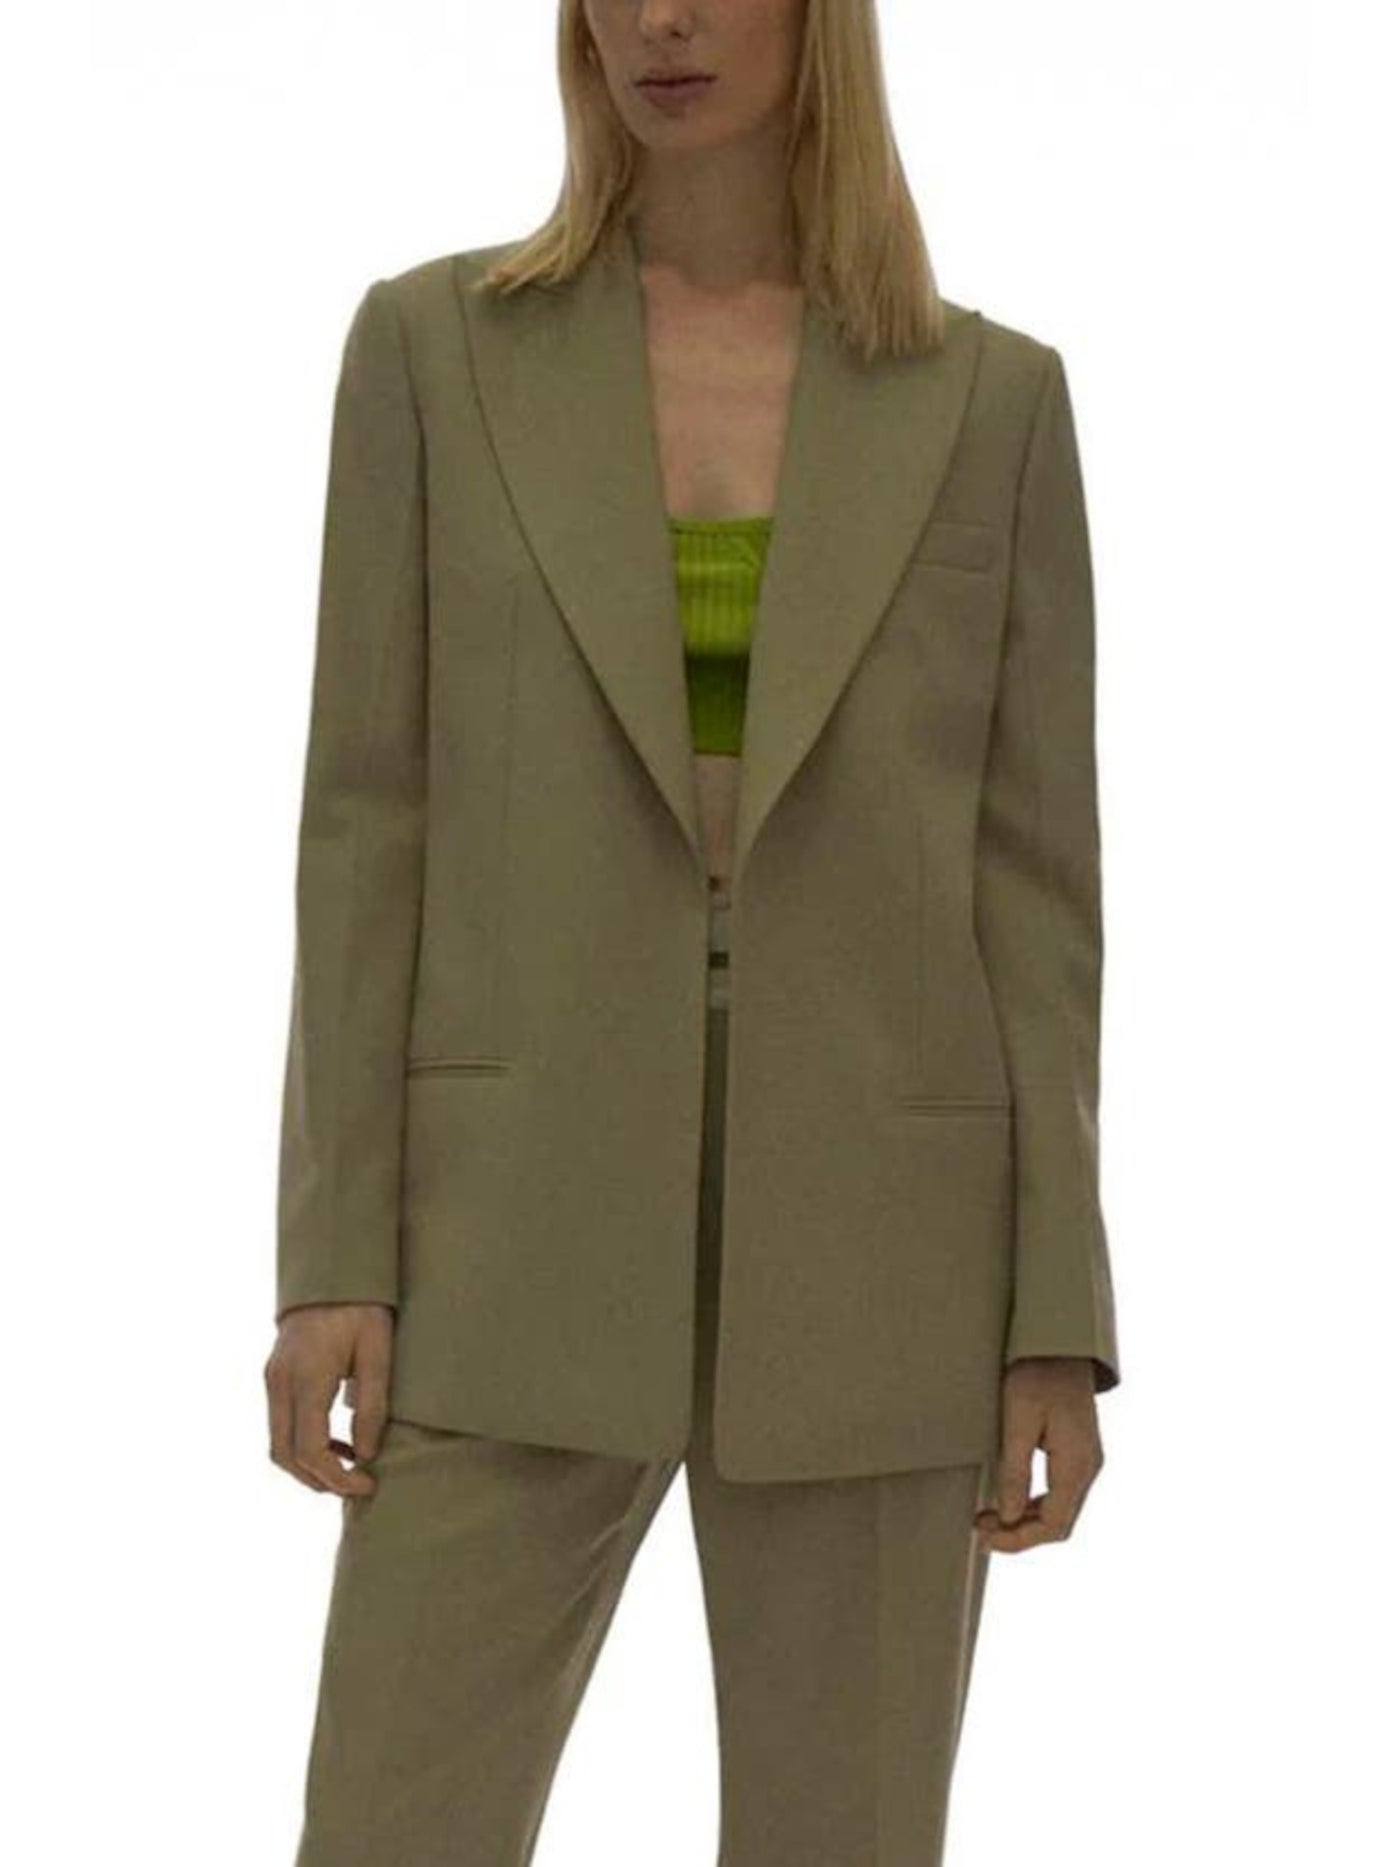 HELMUT LANG Womens Green Pocketed Open Front Notched Lapel Lined Vented Cuffs Wear To Work Blazer Jacket 0